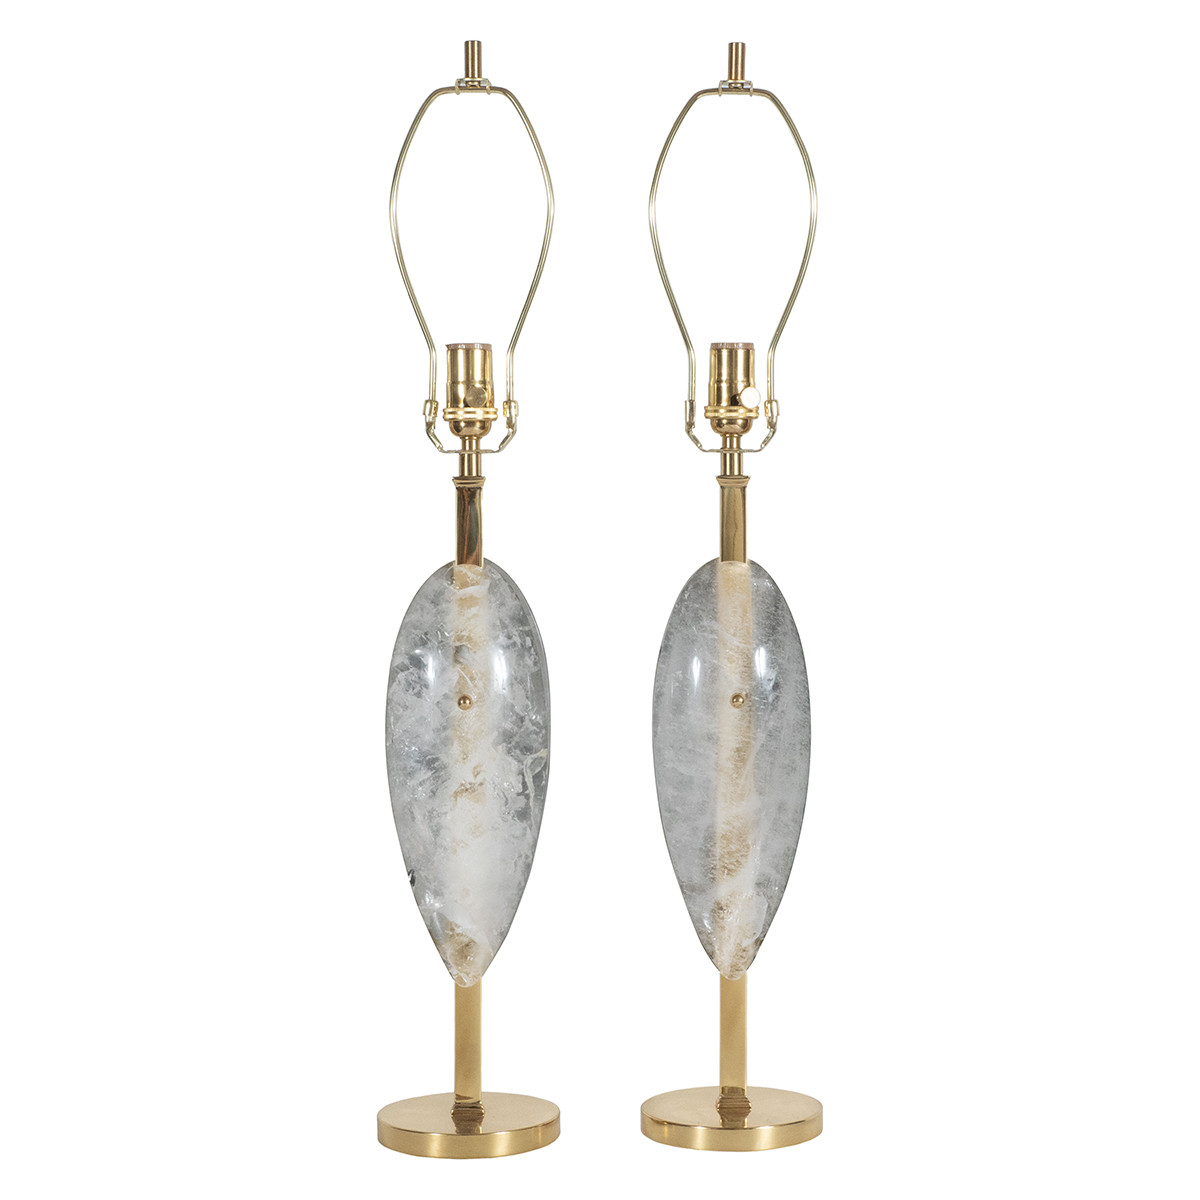 Pair of Rock Crystal and Brass "Purity" Table Lamps by Spark Interior